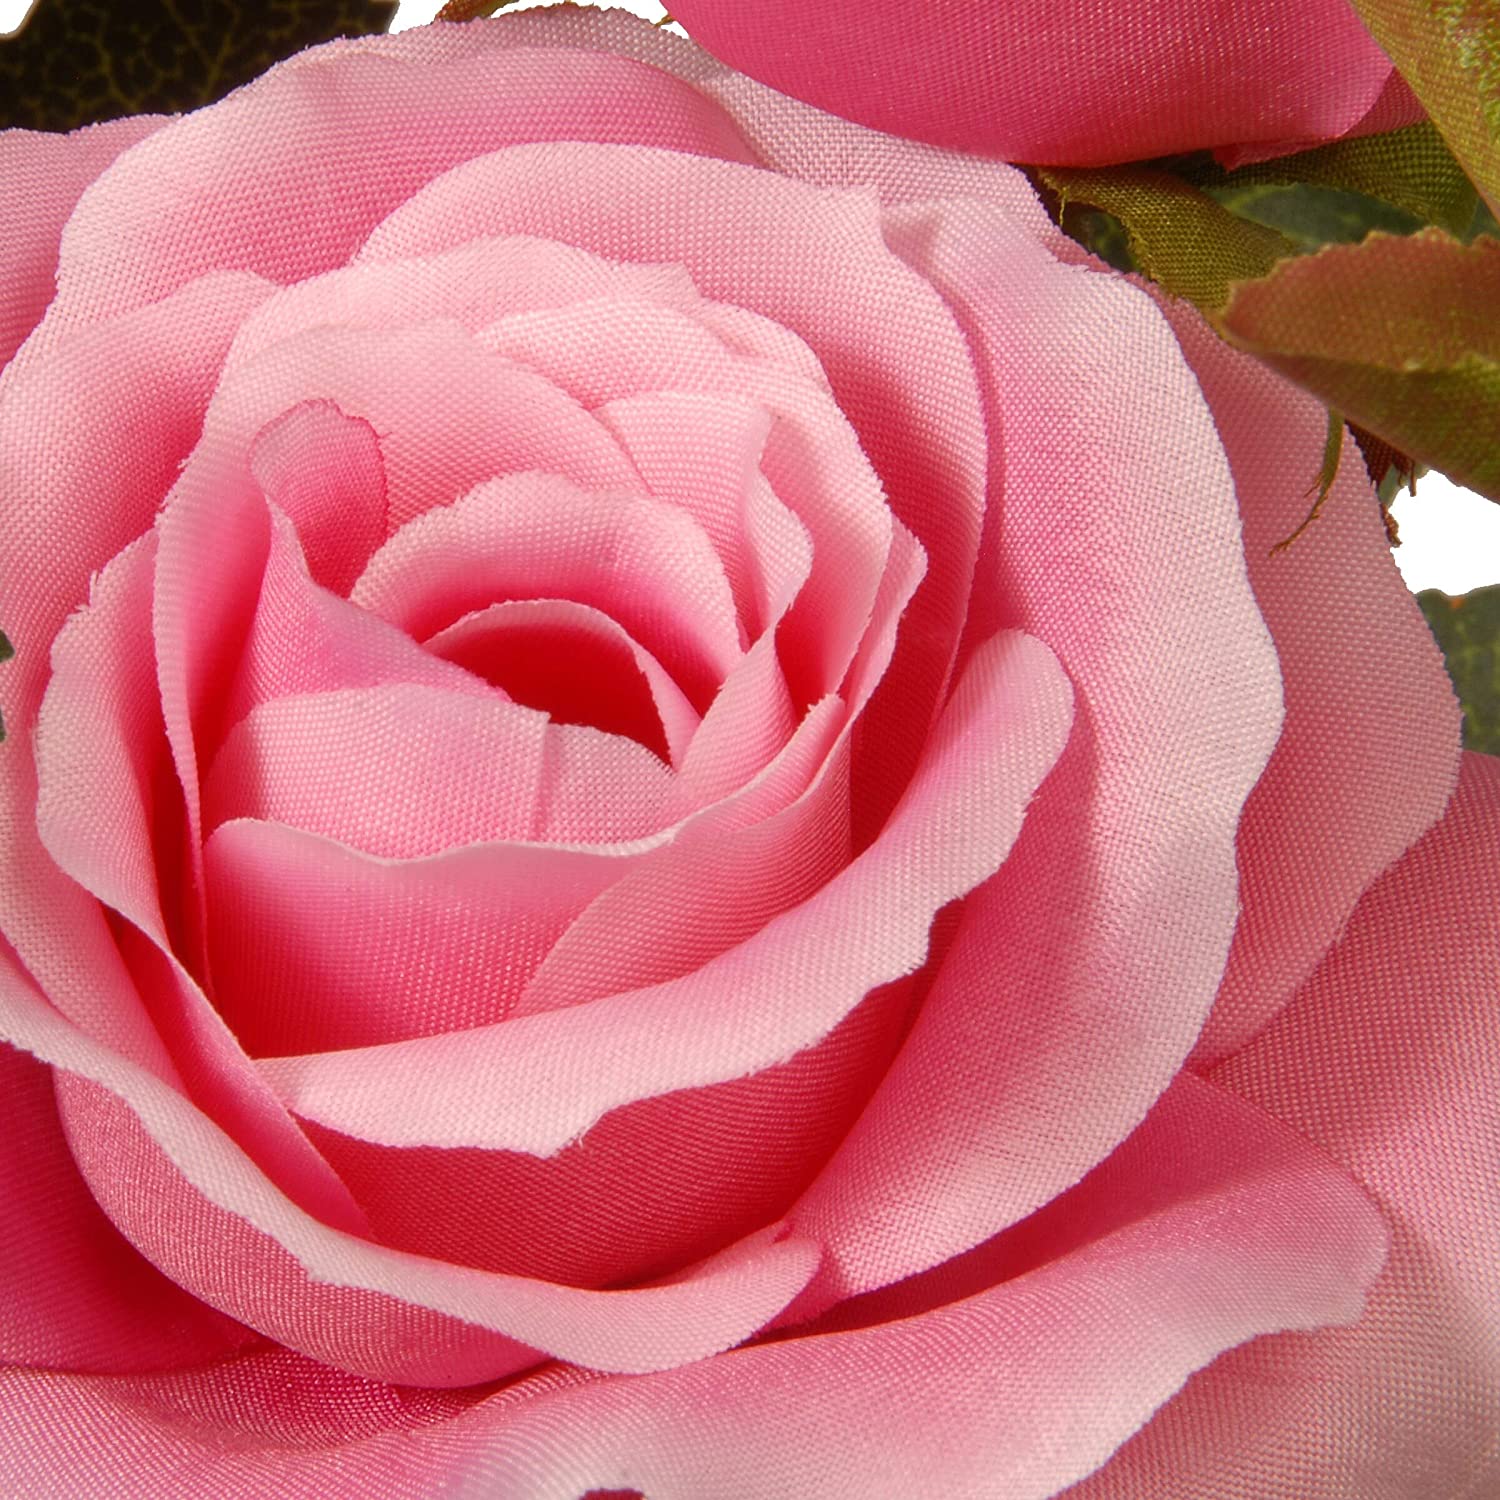 UKN 10" Potted Pink Rose Flowers